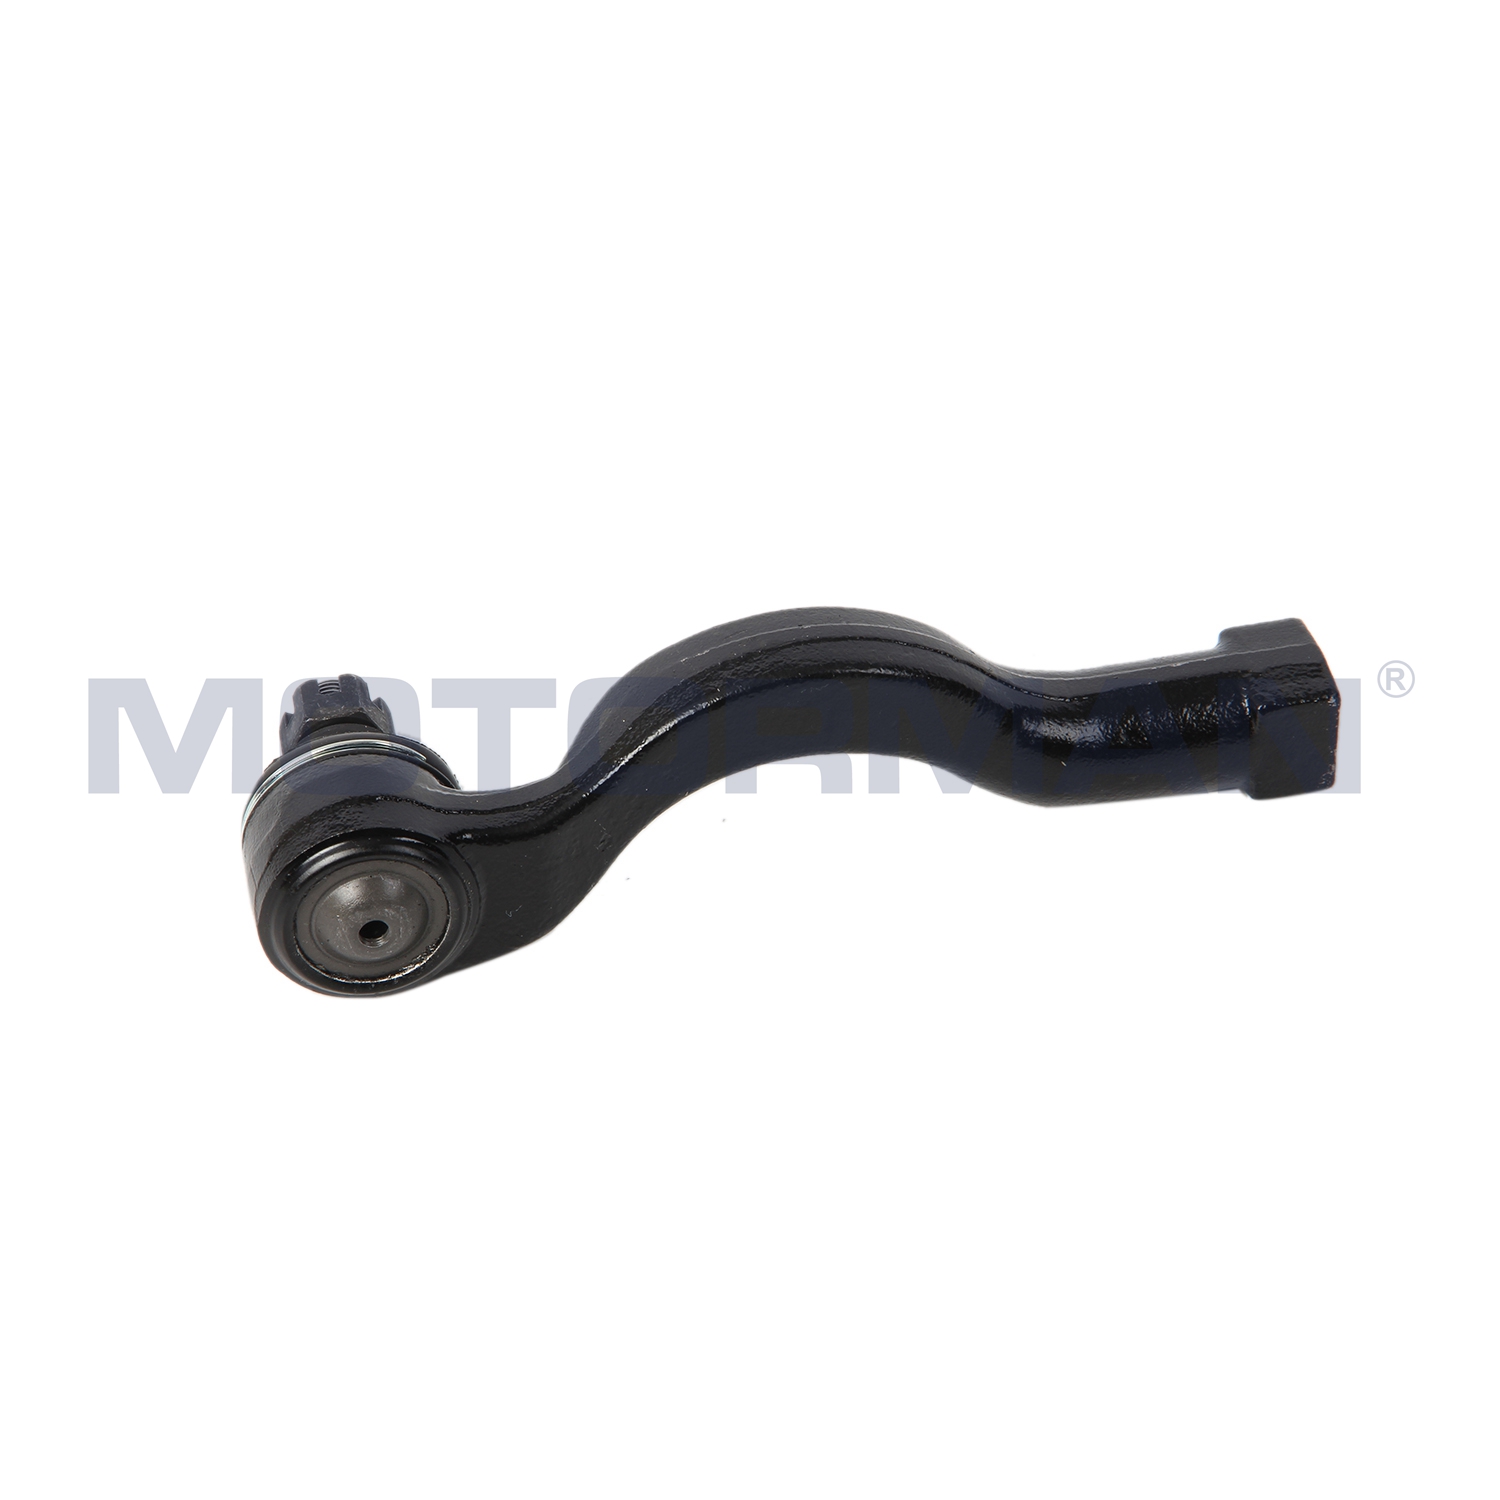 Replacement parts tie rod end for MITSUBISHI PAJERO 